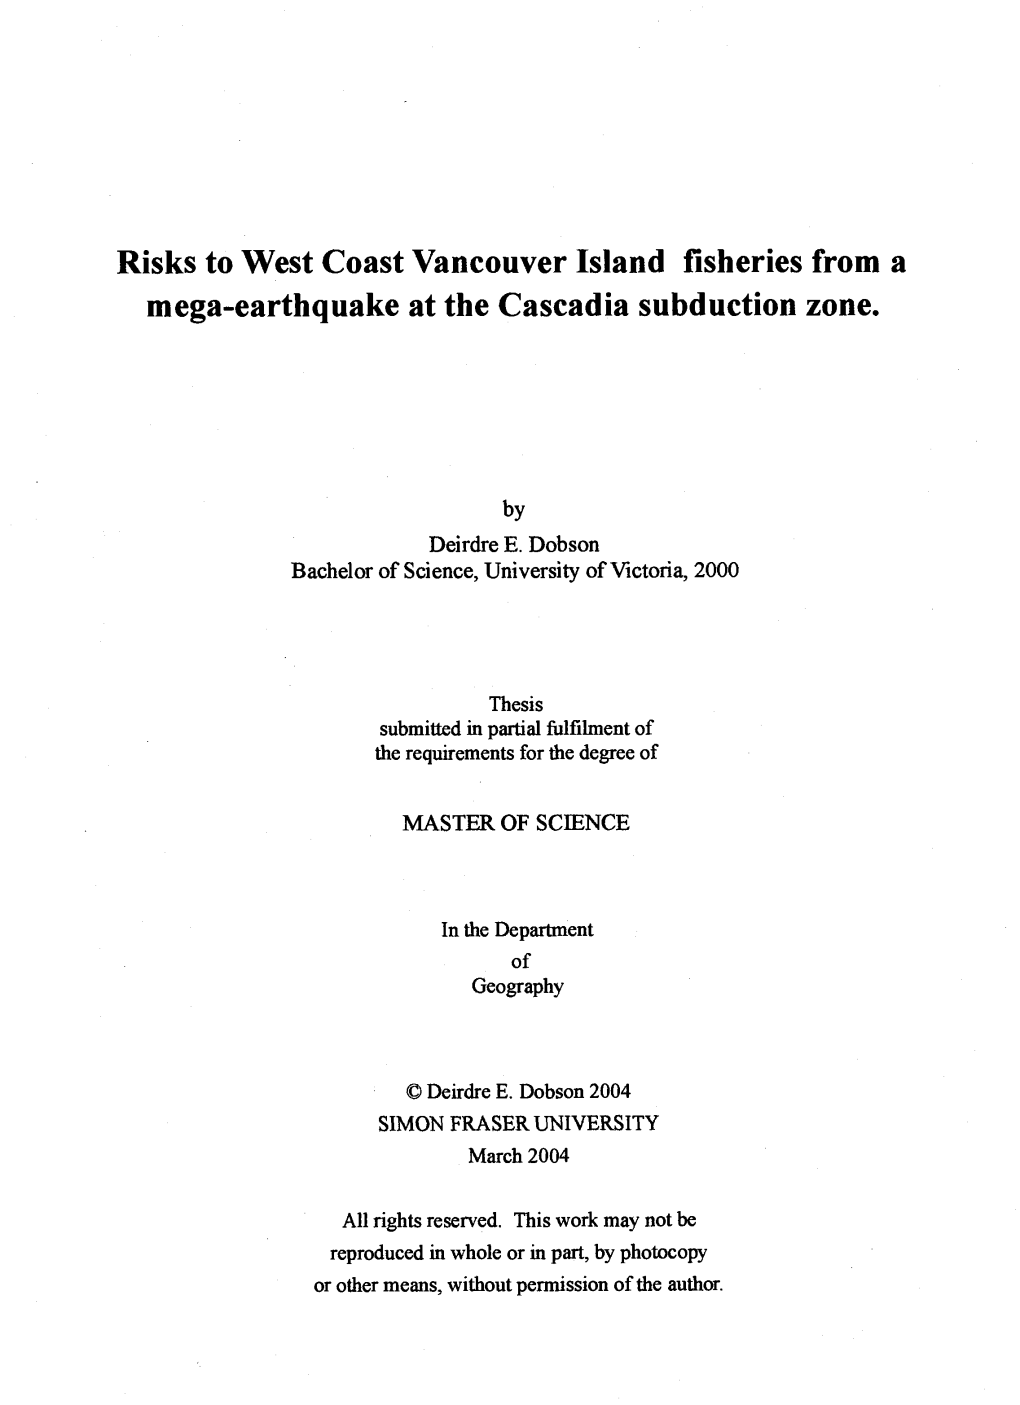 Risks to West Coast Vancouver Island Fisheries from a Mega-Earthquake at the Cascadia Subduction Zone